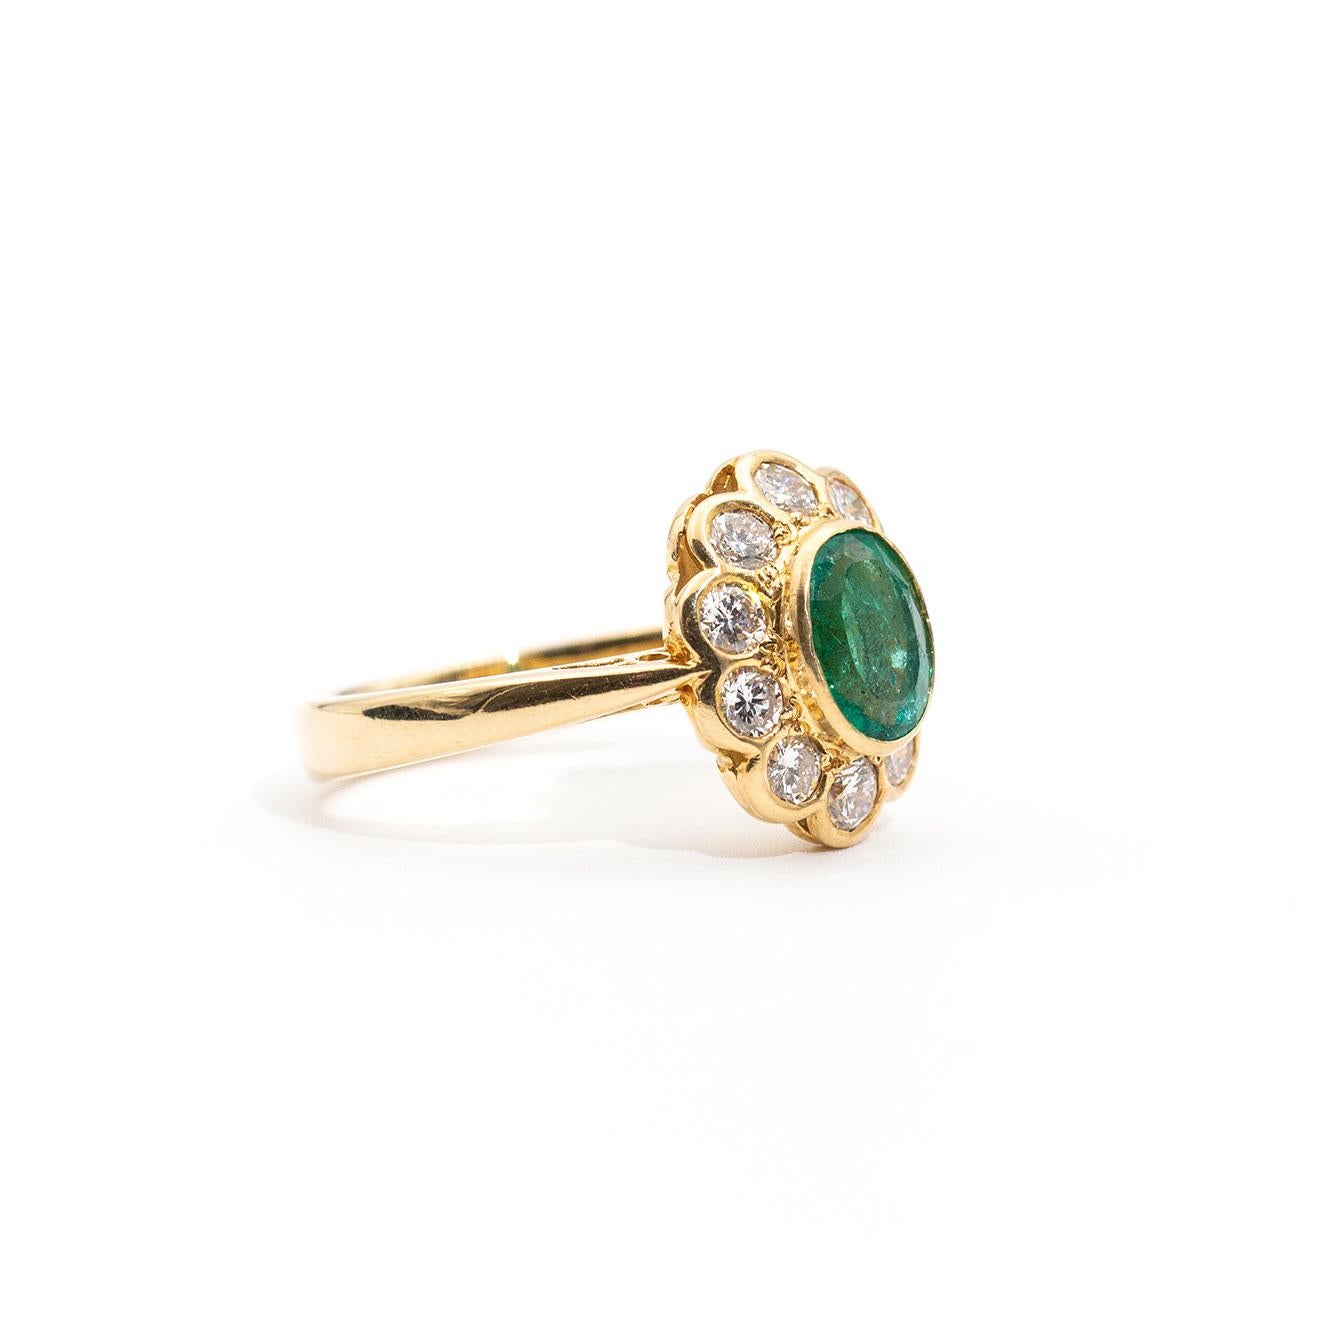 This wondrous vintage ring is forged in 18 carat yellow gold and features a stunning bright 1.03ct faceted oval emerald and is surrounded by a perfect border of ten round brilliant cut diamonds. We call this ever so charming piece The Juniper Ring. 